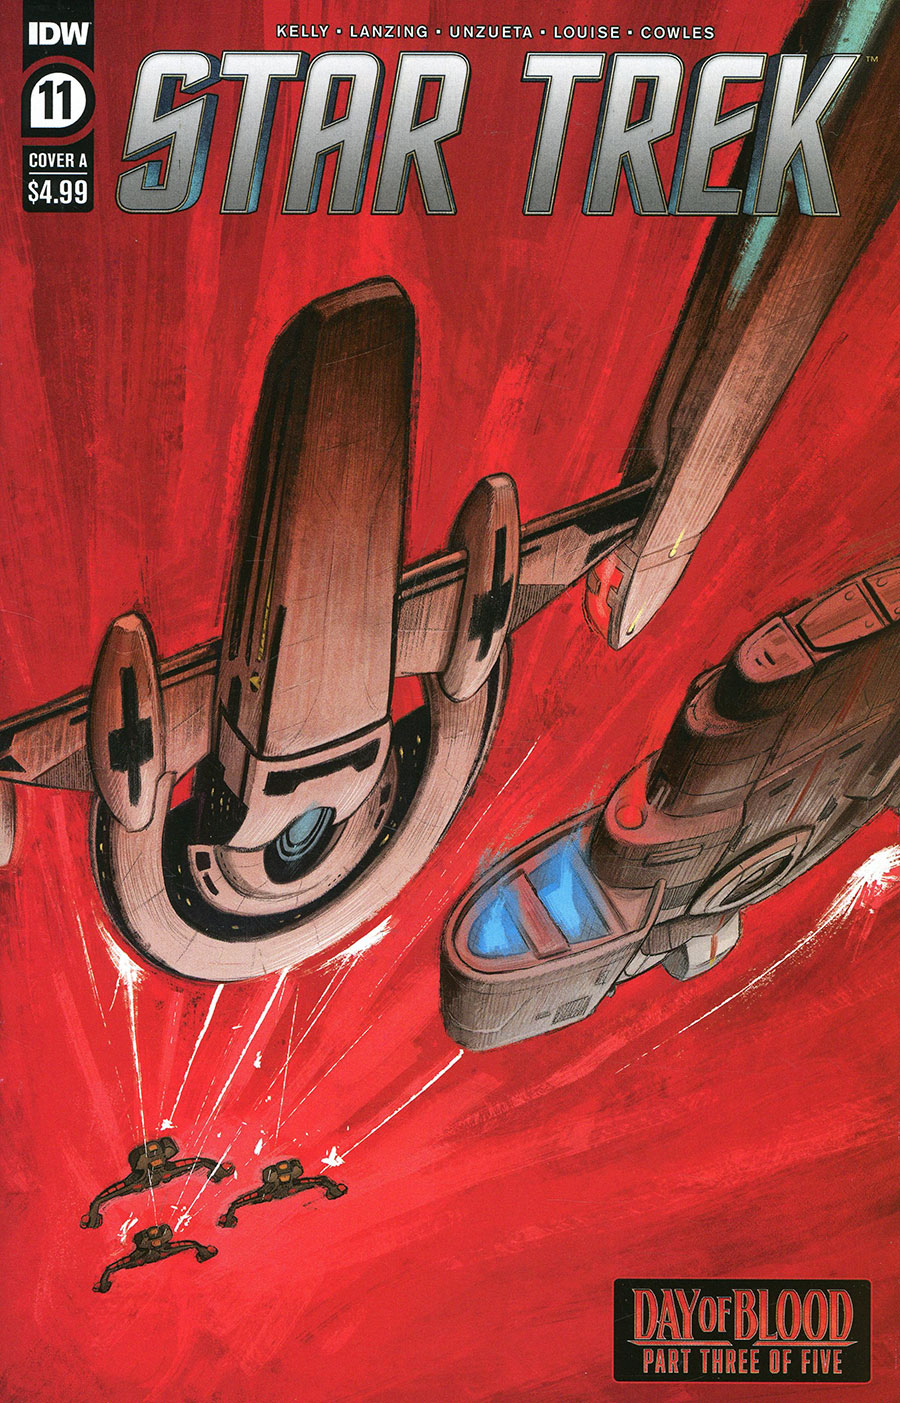 Star Trek (IDW) Vol 2 #11 Cover A Regular Malachi Ward Cover (Day Of Blood Part 3)